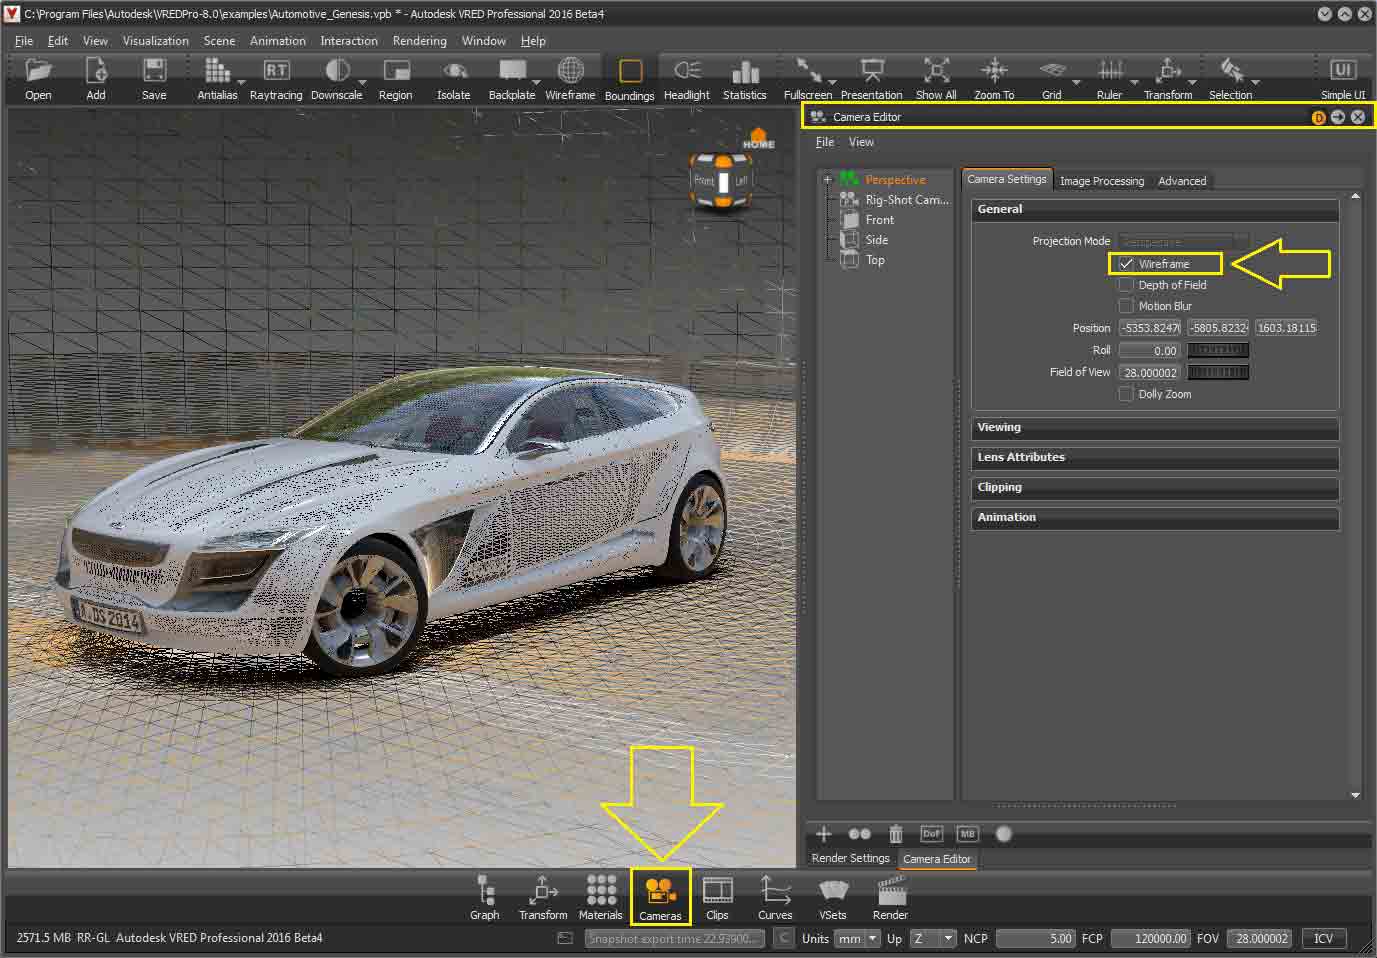 Autodesk-VRED-Products2.jpg